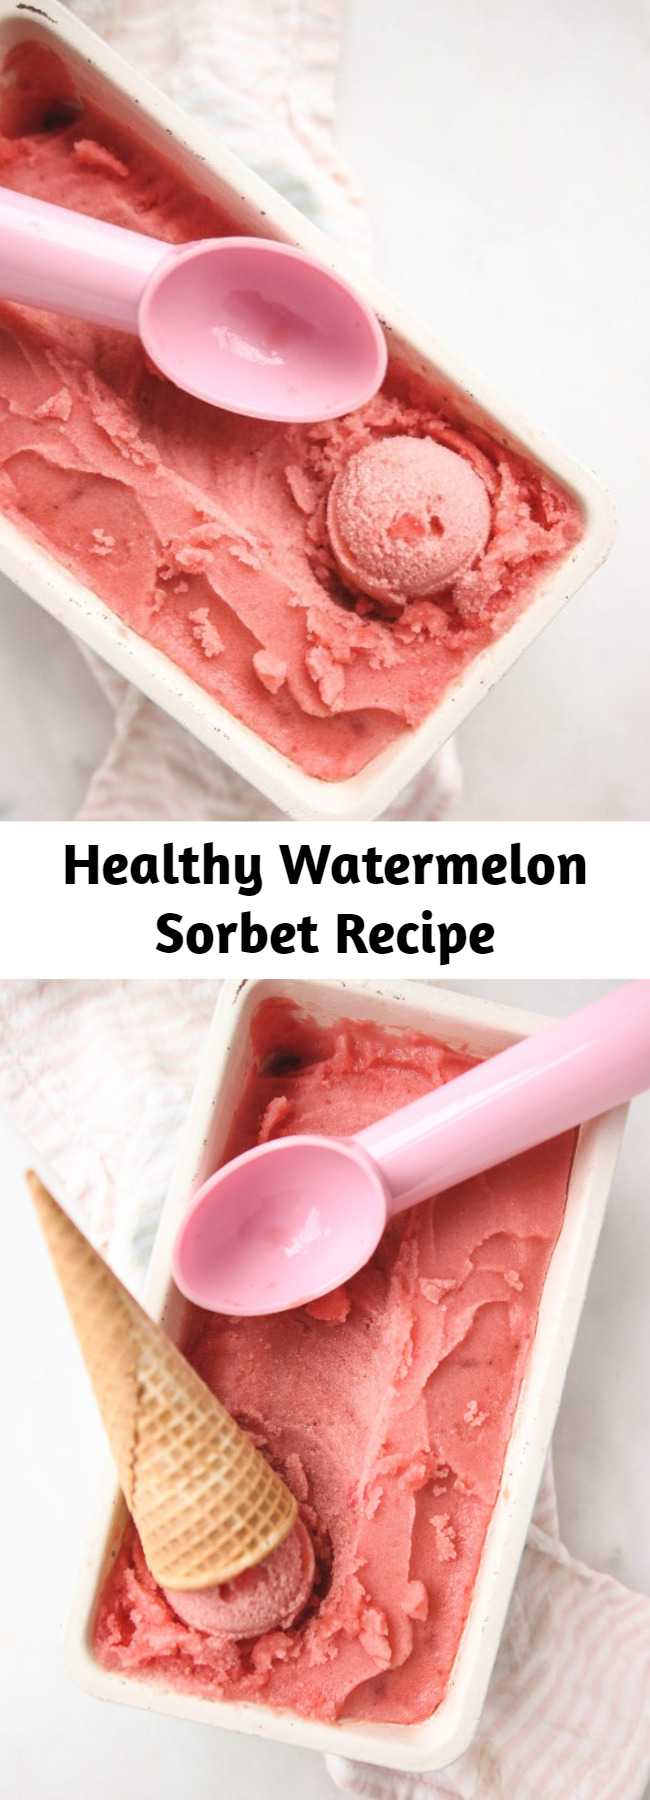 Healthy Watermelon Sorbet Recipe - A healthy, whole food plant based watermelon sorbet that requires NO churning! Made from 3 simple ingredients, this delicious raw vegan treat will keep you cool all summer long. #vegan #veganrecipes #plantbased #dairyfree #nicecream #blender #rawvegan #glutenfree #wholefoodplantbased #wfpb #sugarfree #icecream #summerrecipes #watermelon